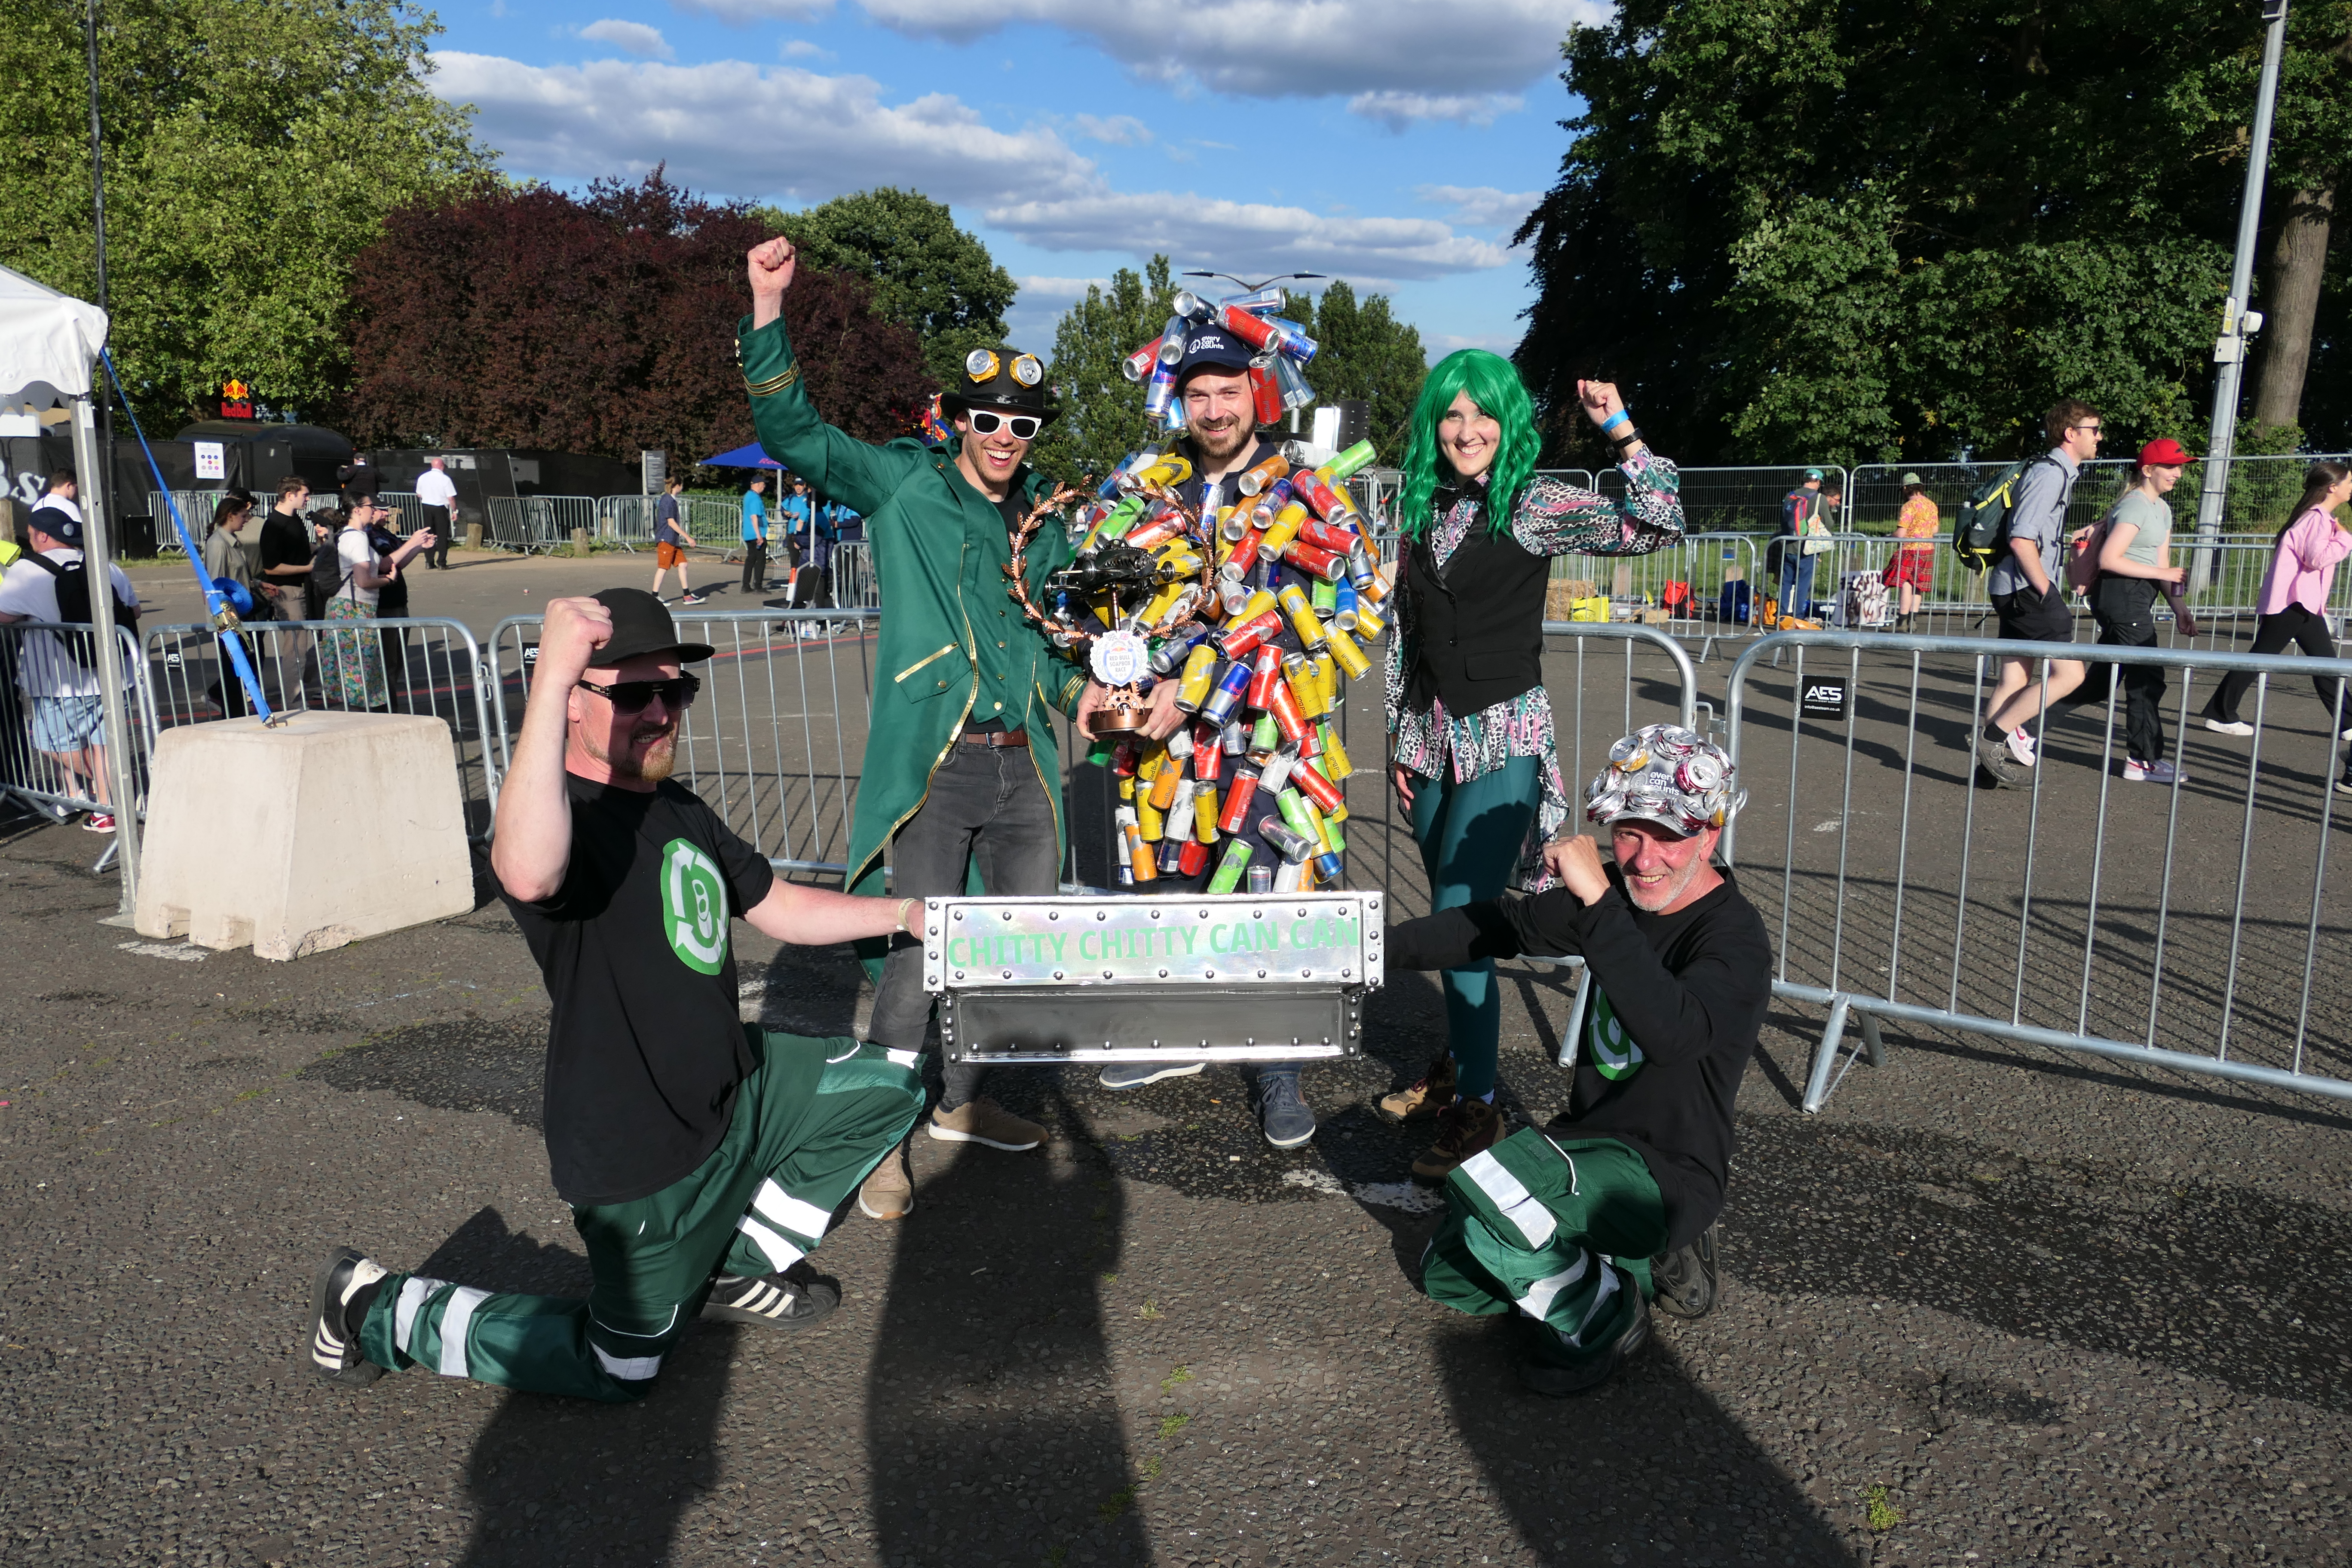 Every Can Counts soapbox team holding their trophy, including a man dressed in an outfit made out of drinks cans